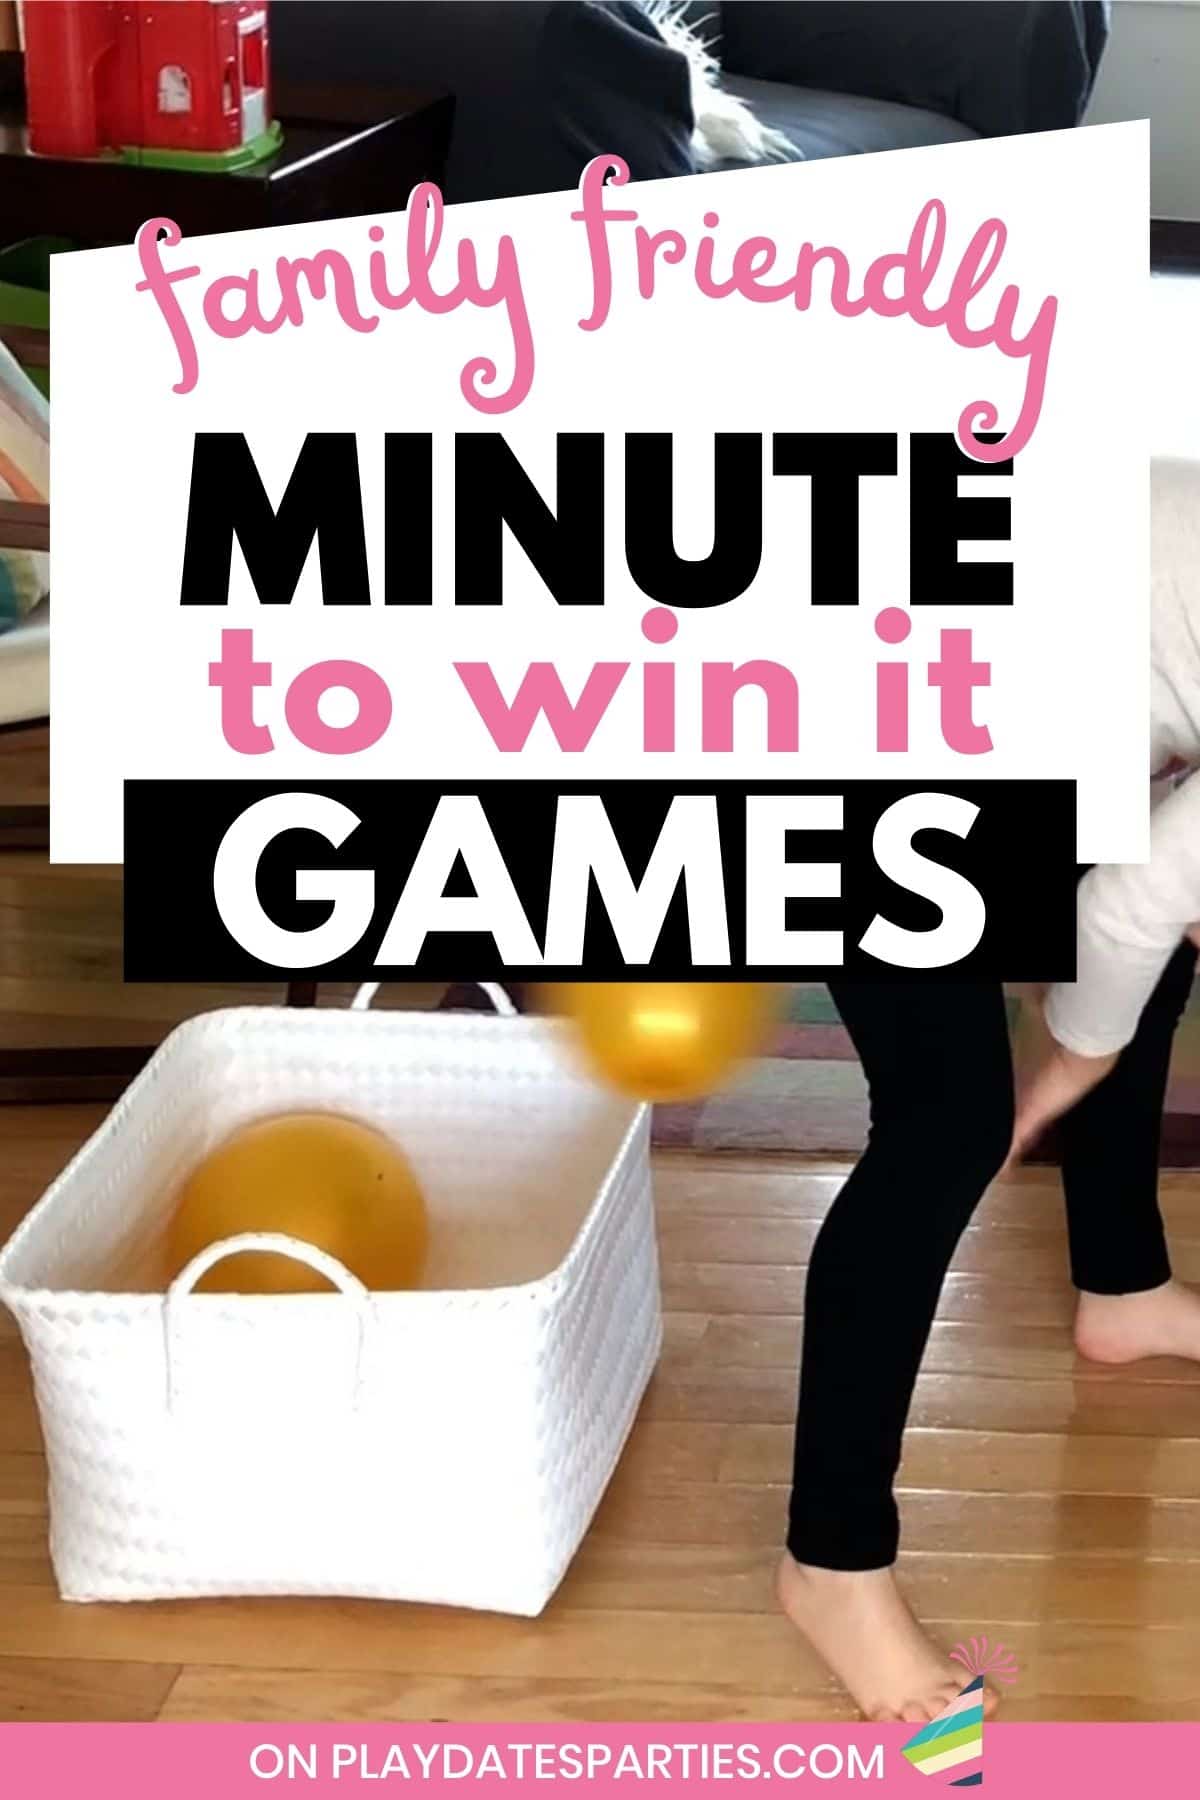 Children playing a game with a balloon with text overlay family friendly minute to win it games.